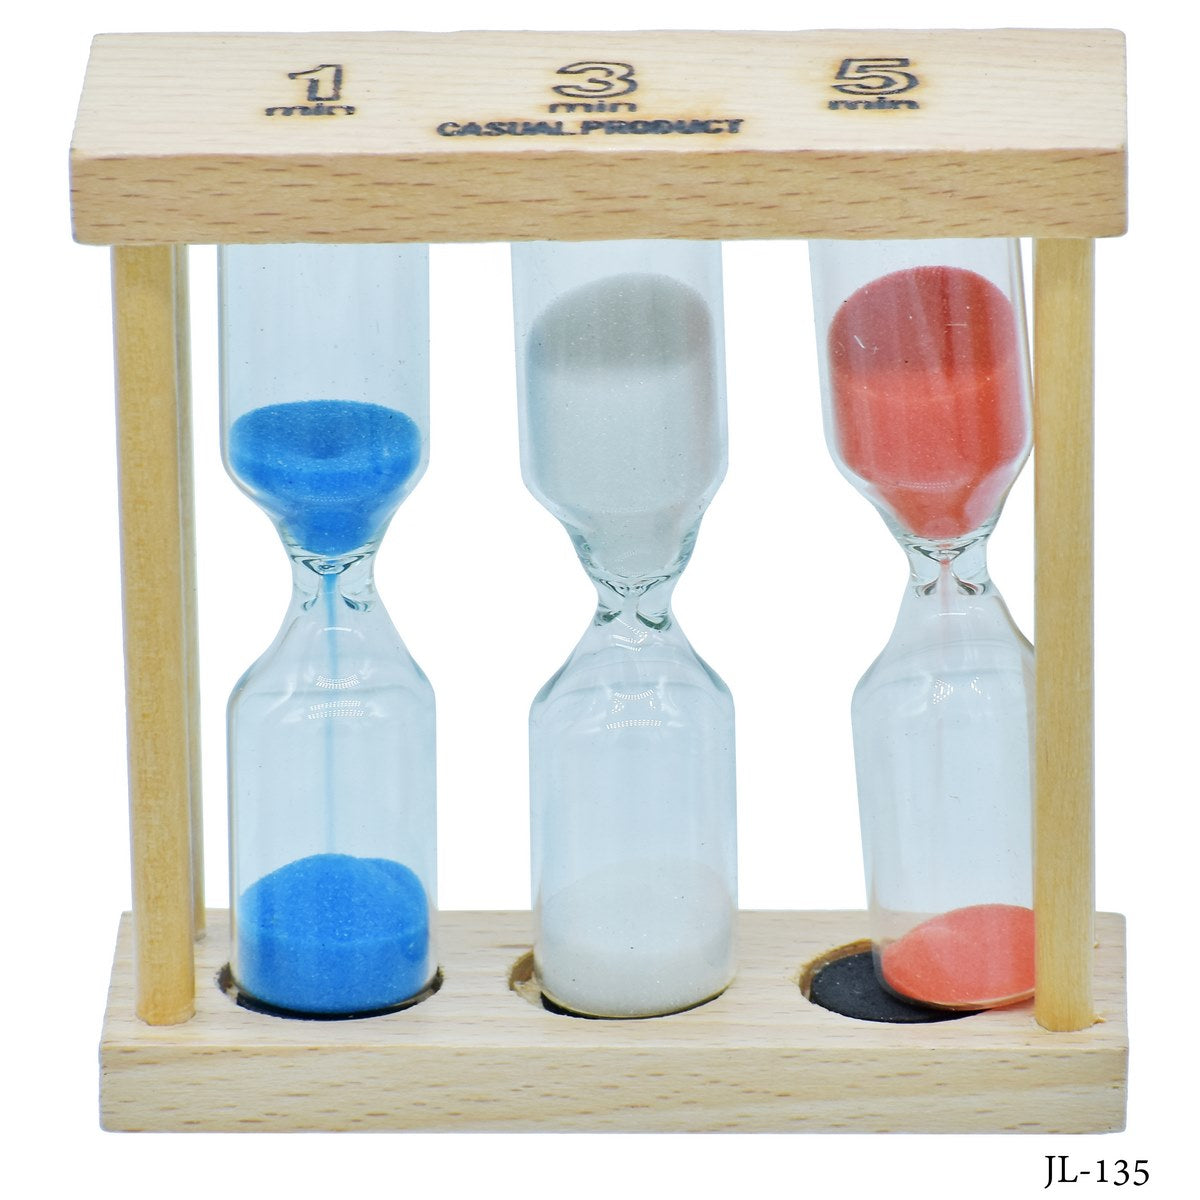 jags-mumbai Miniature Sand Timer Wooden Square Model 3IN1 1-3-5 Minutes